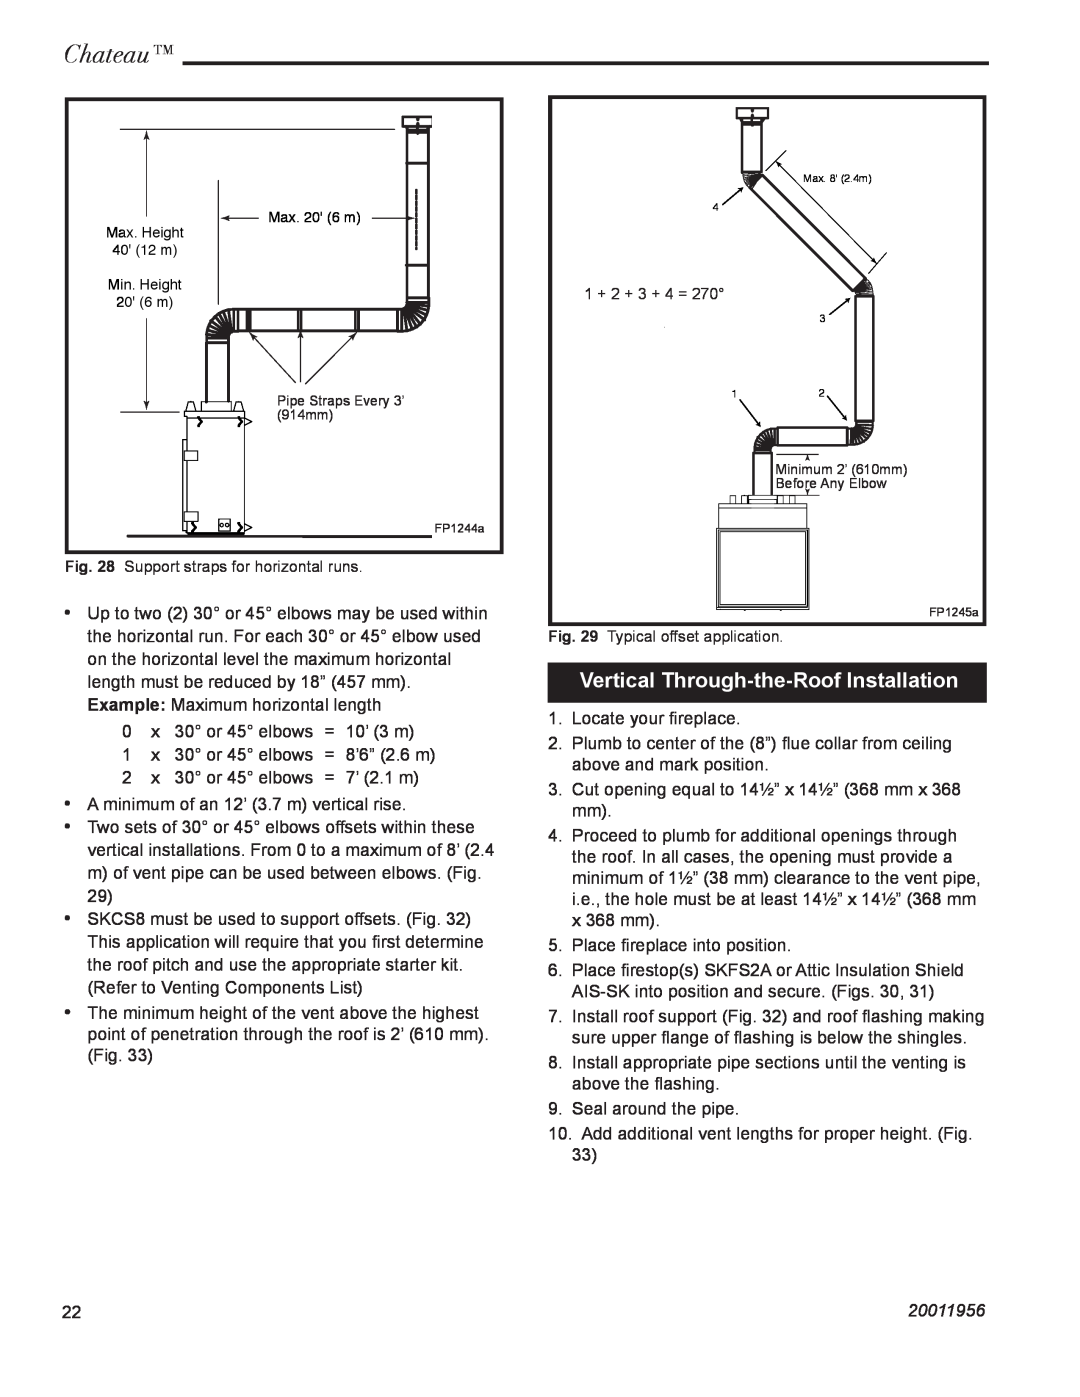 CFM Corporation DVT44IN, DVT38IN installation instructions Vertical Through-the-RoofInstallation, Chateau, 20011956 